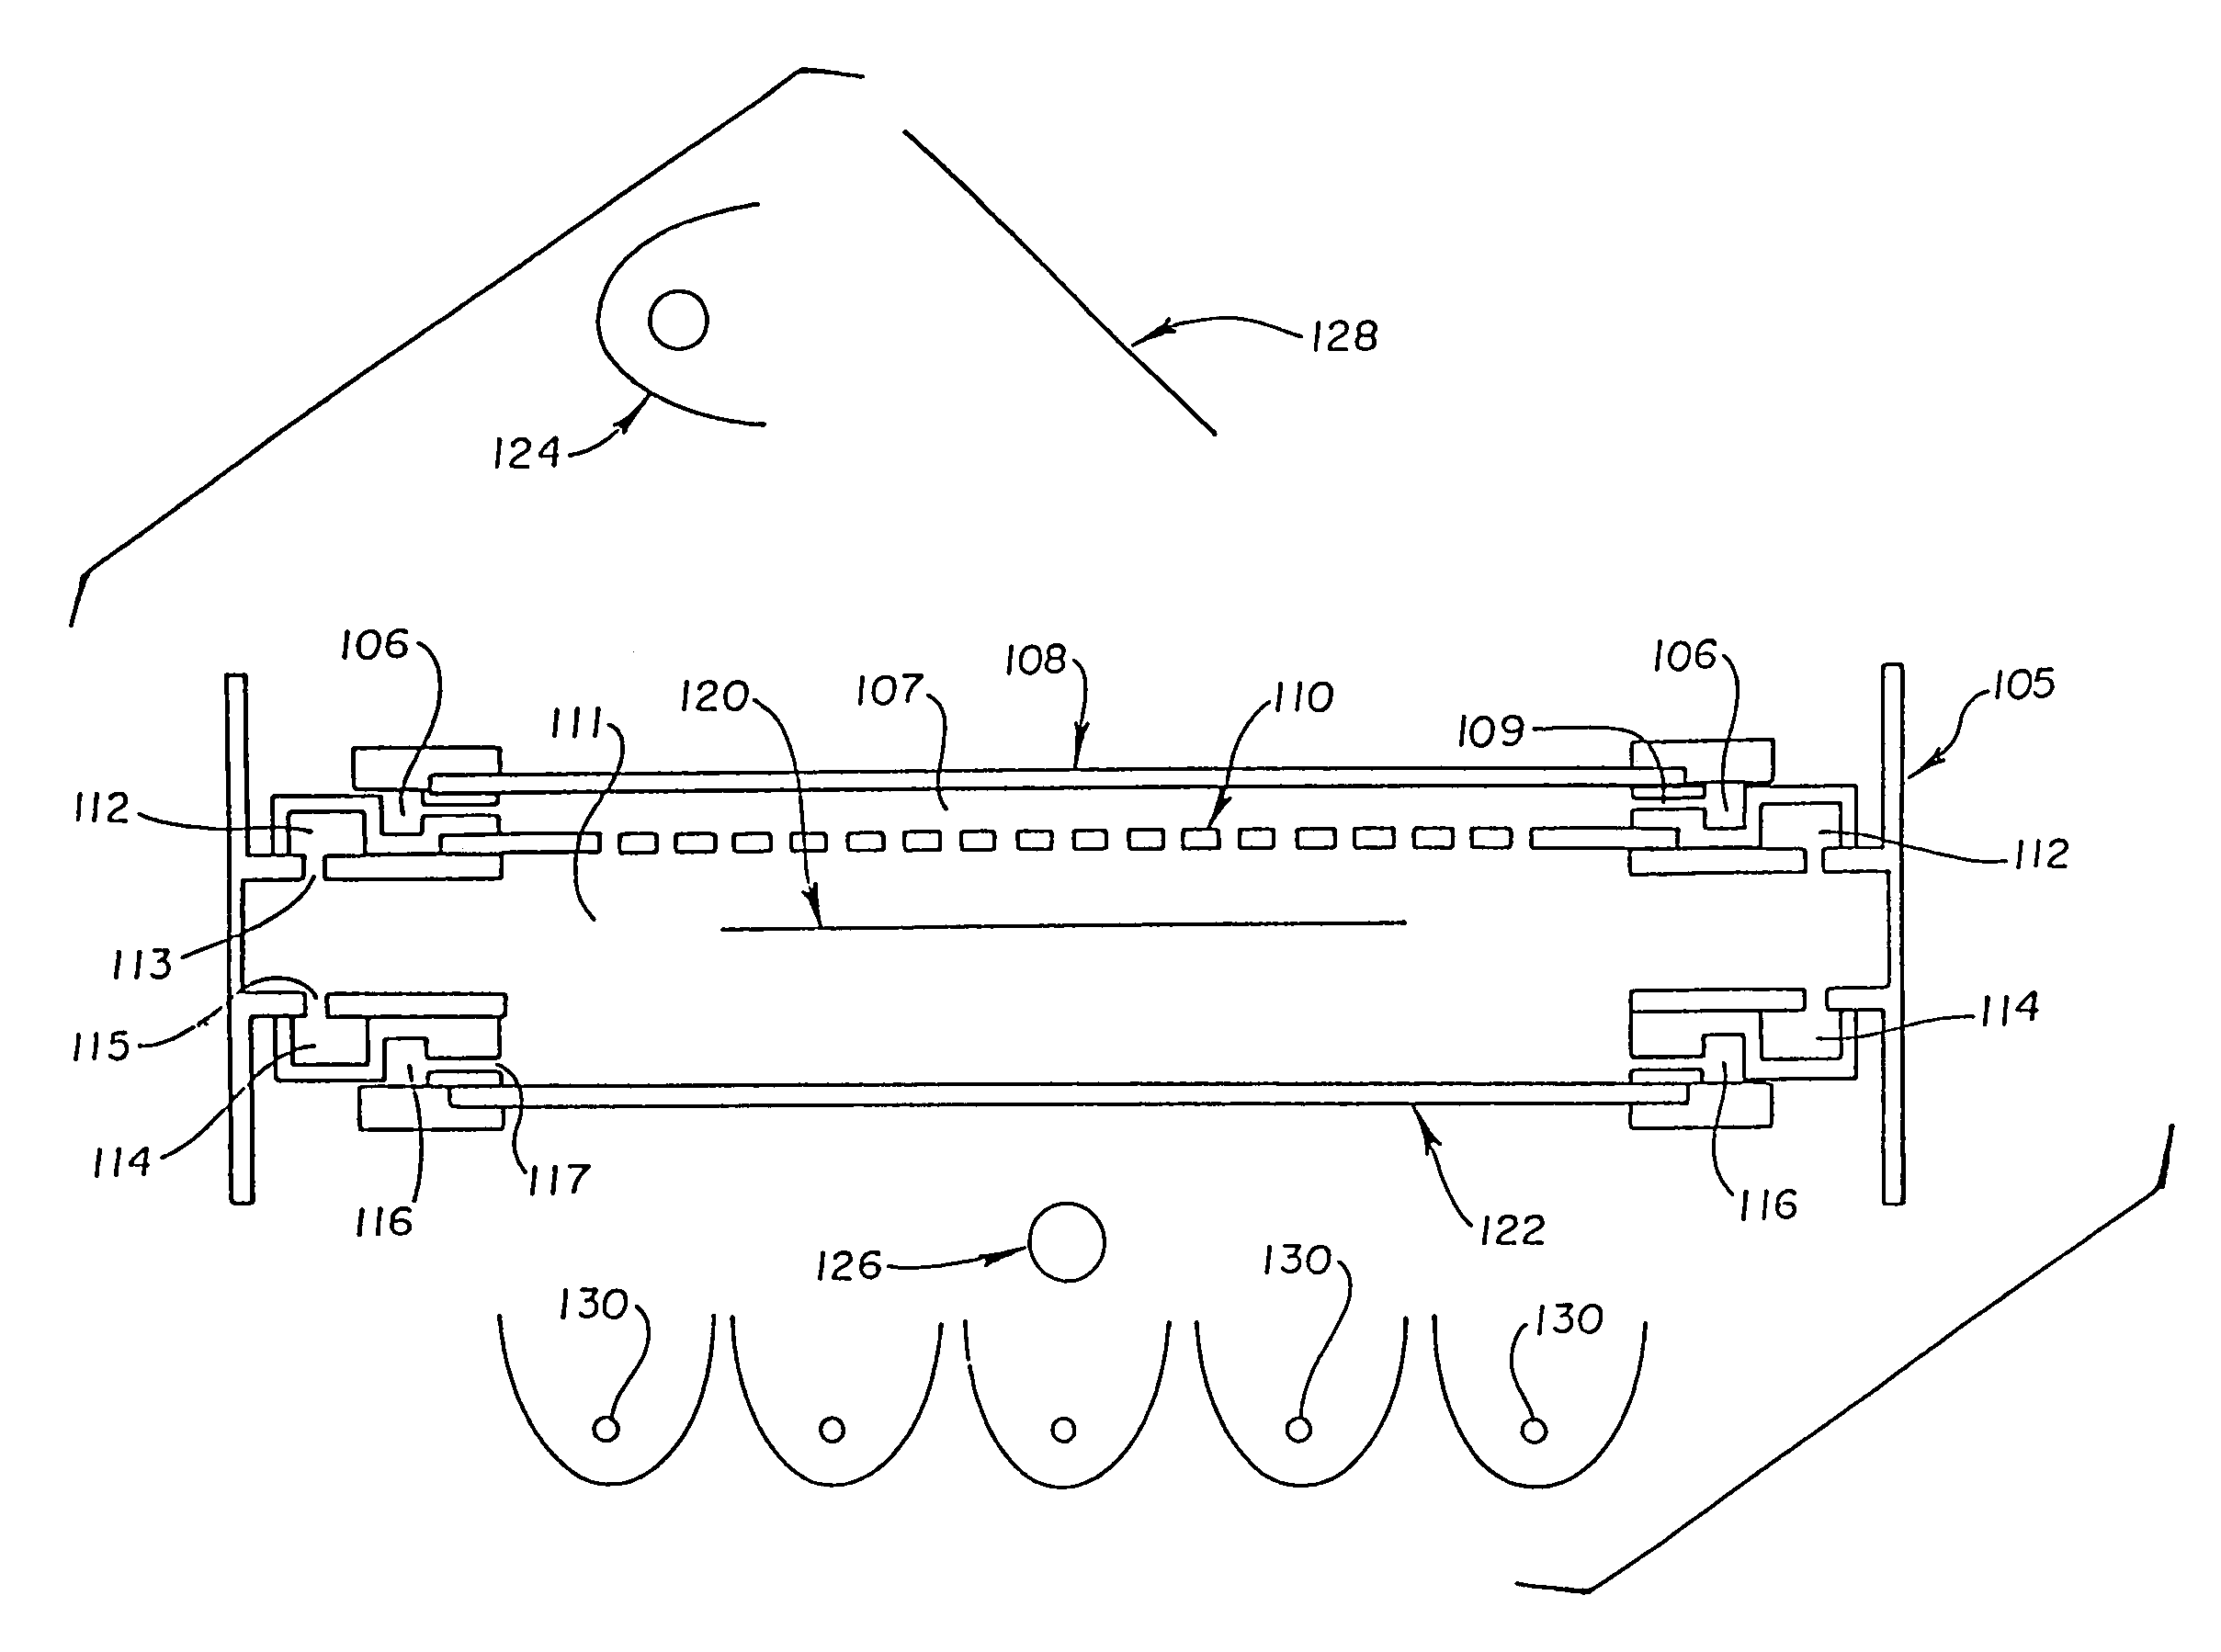 Apparatus for surface conditioning